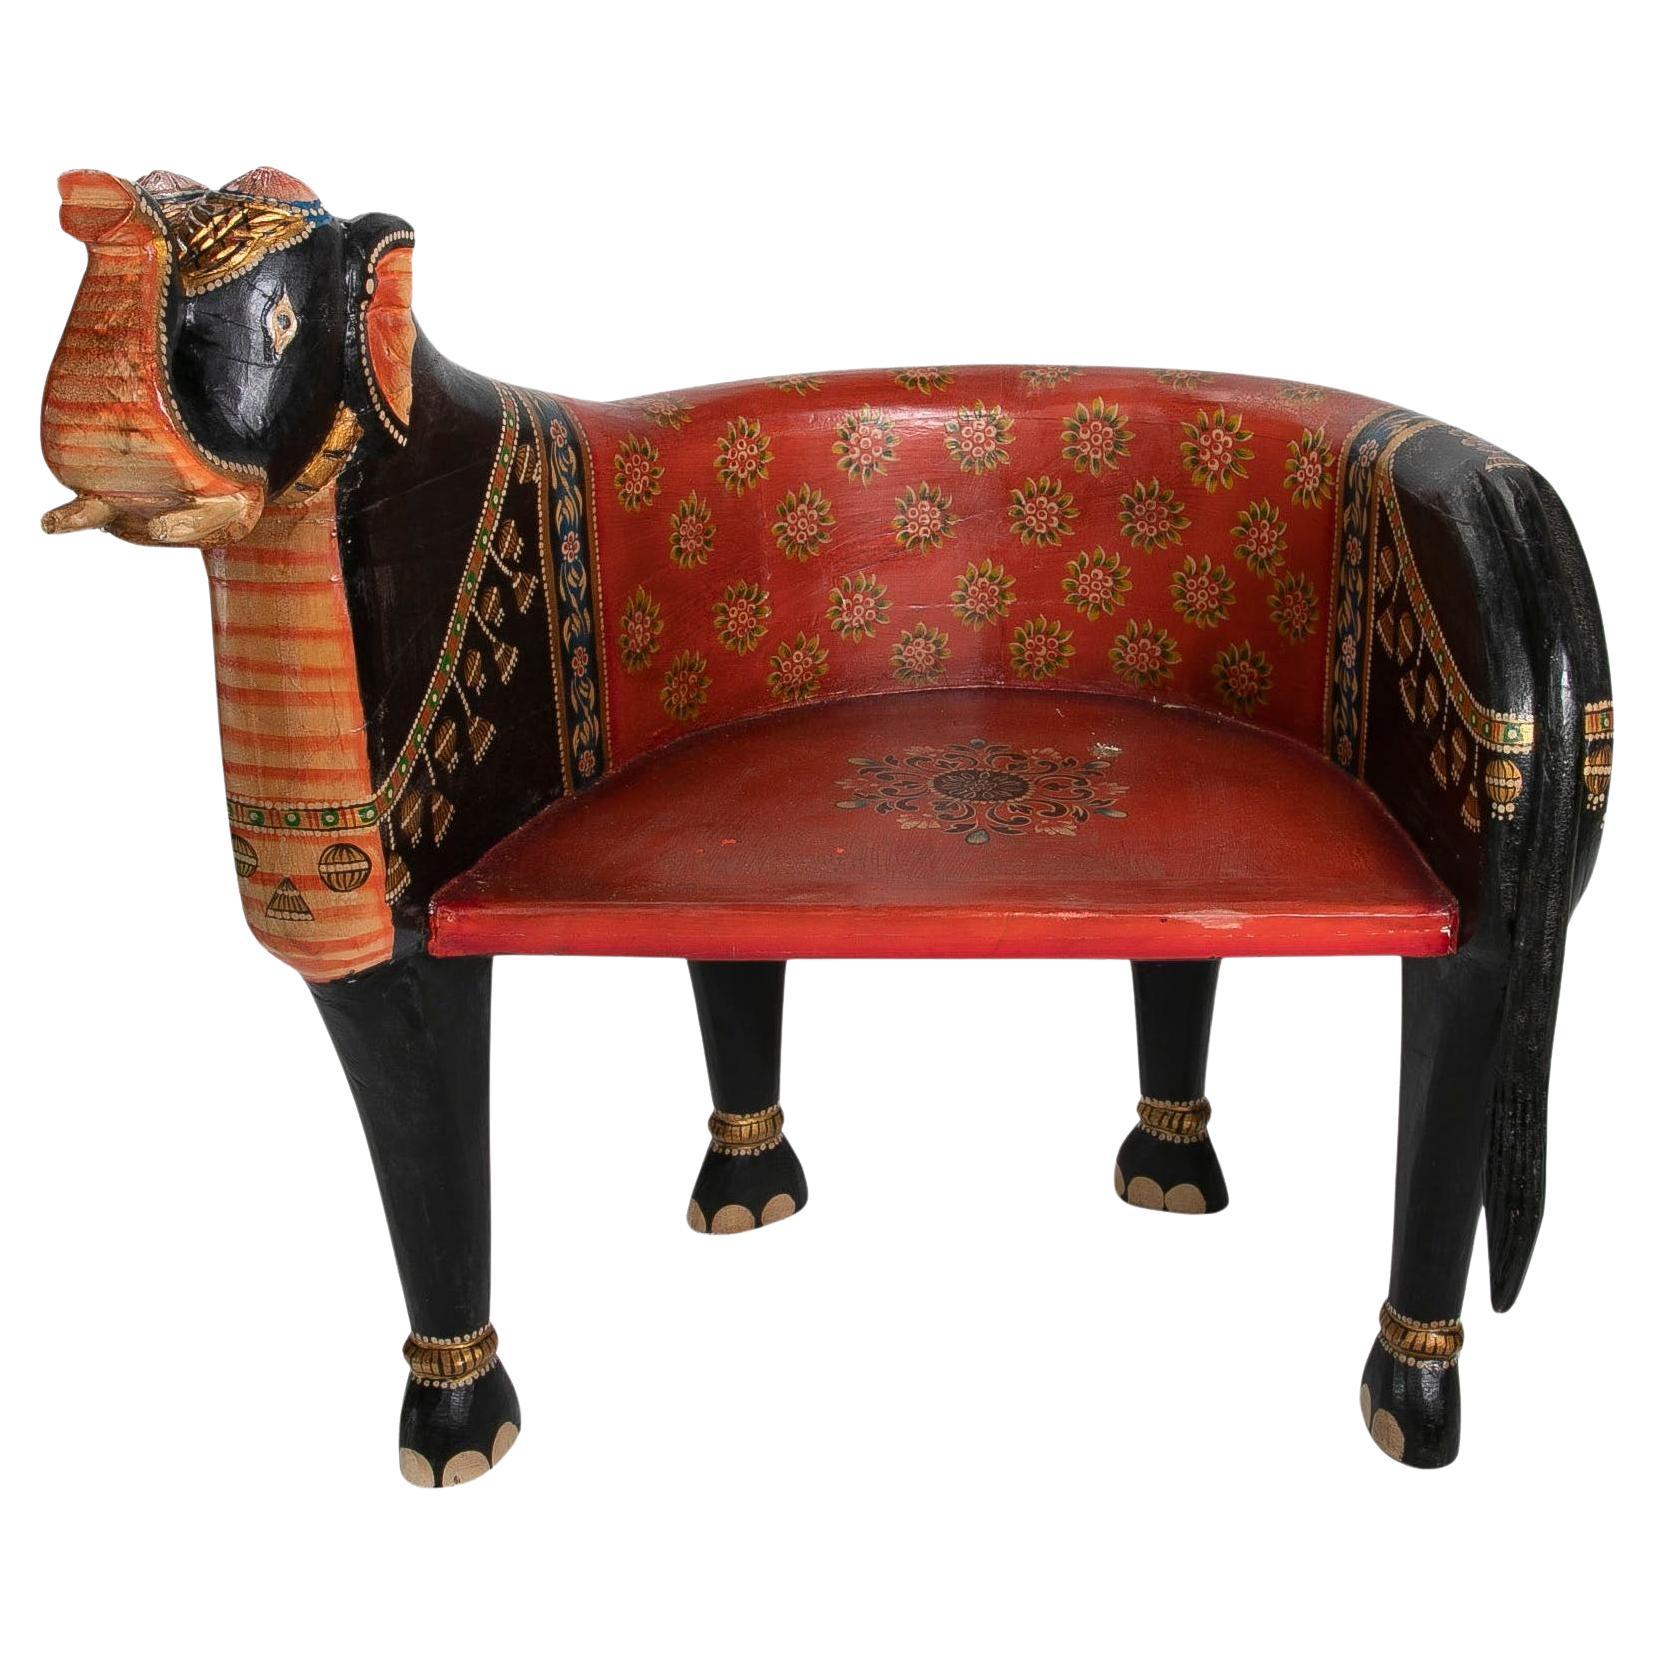 Hand-Carved and Hand-Painted Wooden Elephant Armchair